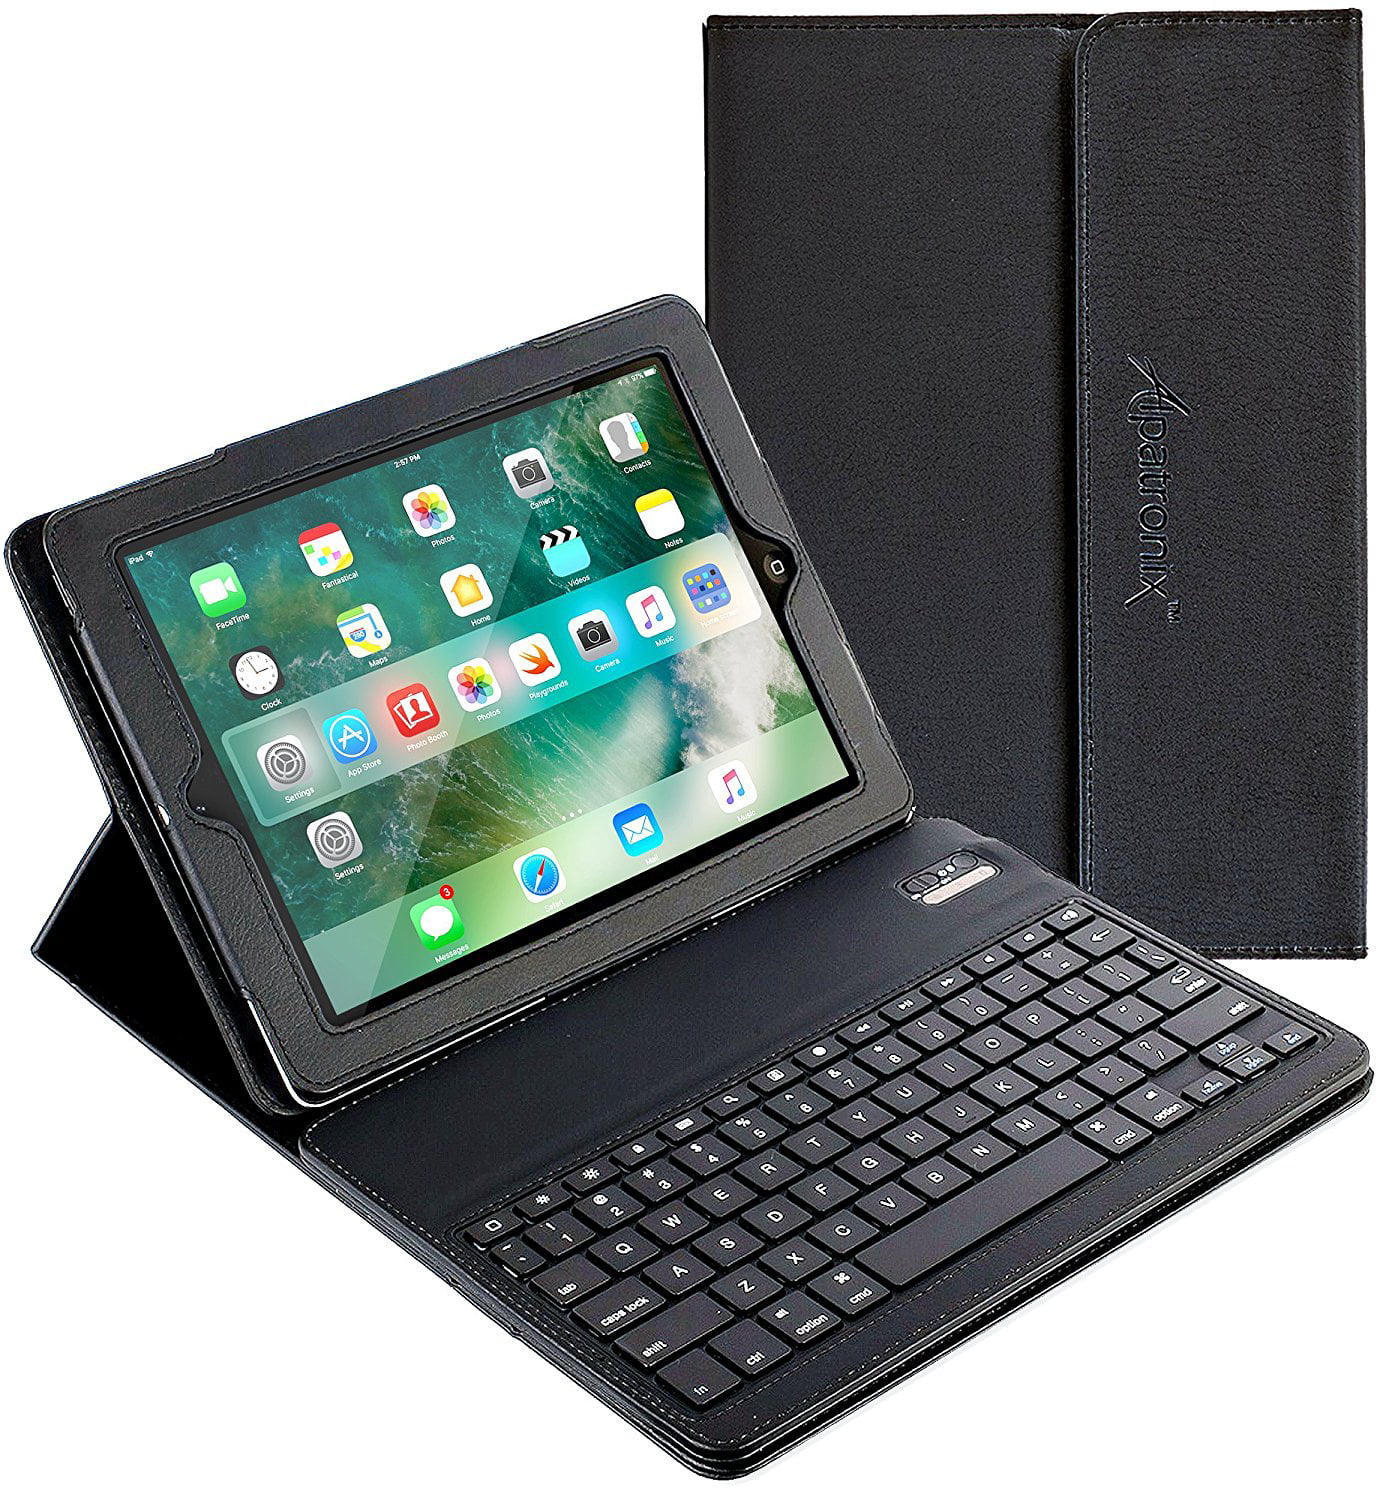 Wireless Bluetooth Keyboard Folio Leather Case for iPad 3/2/1 *FREE A/C CHARGER* 